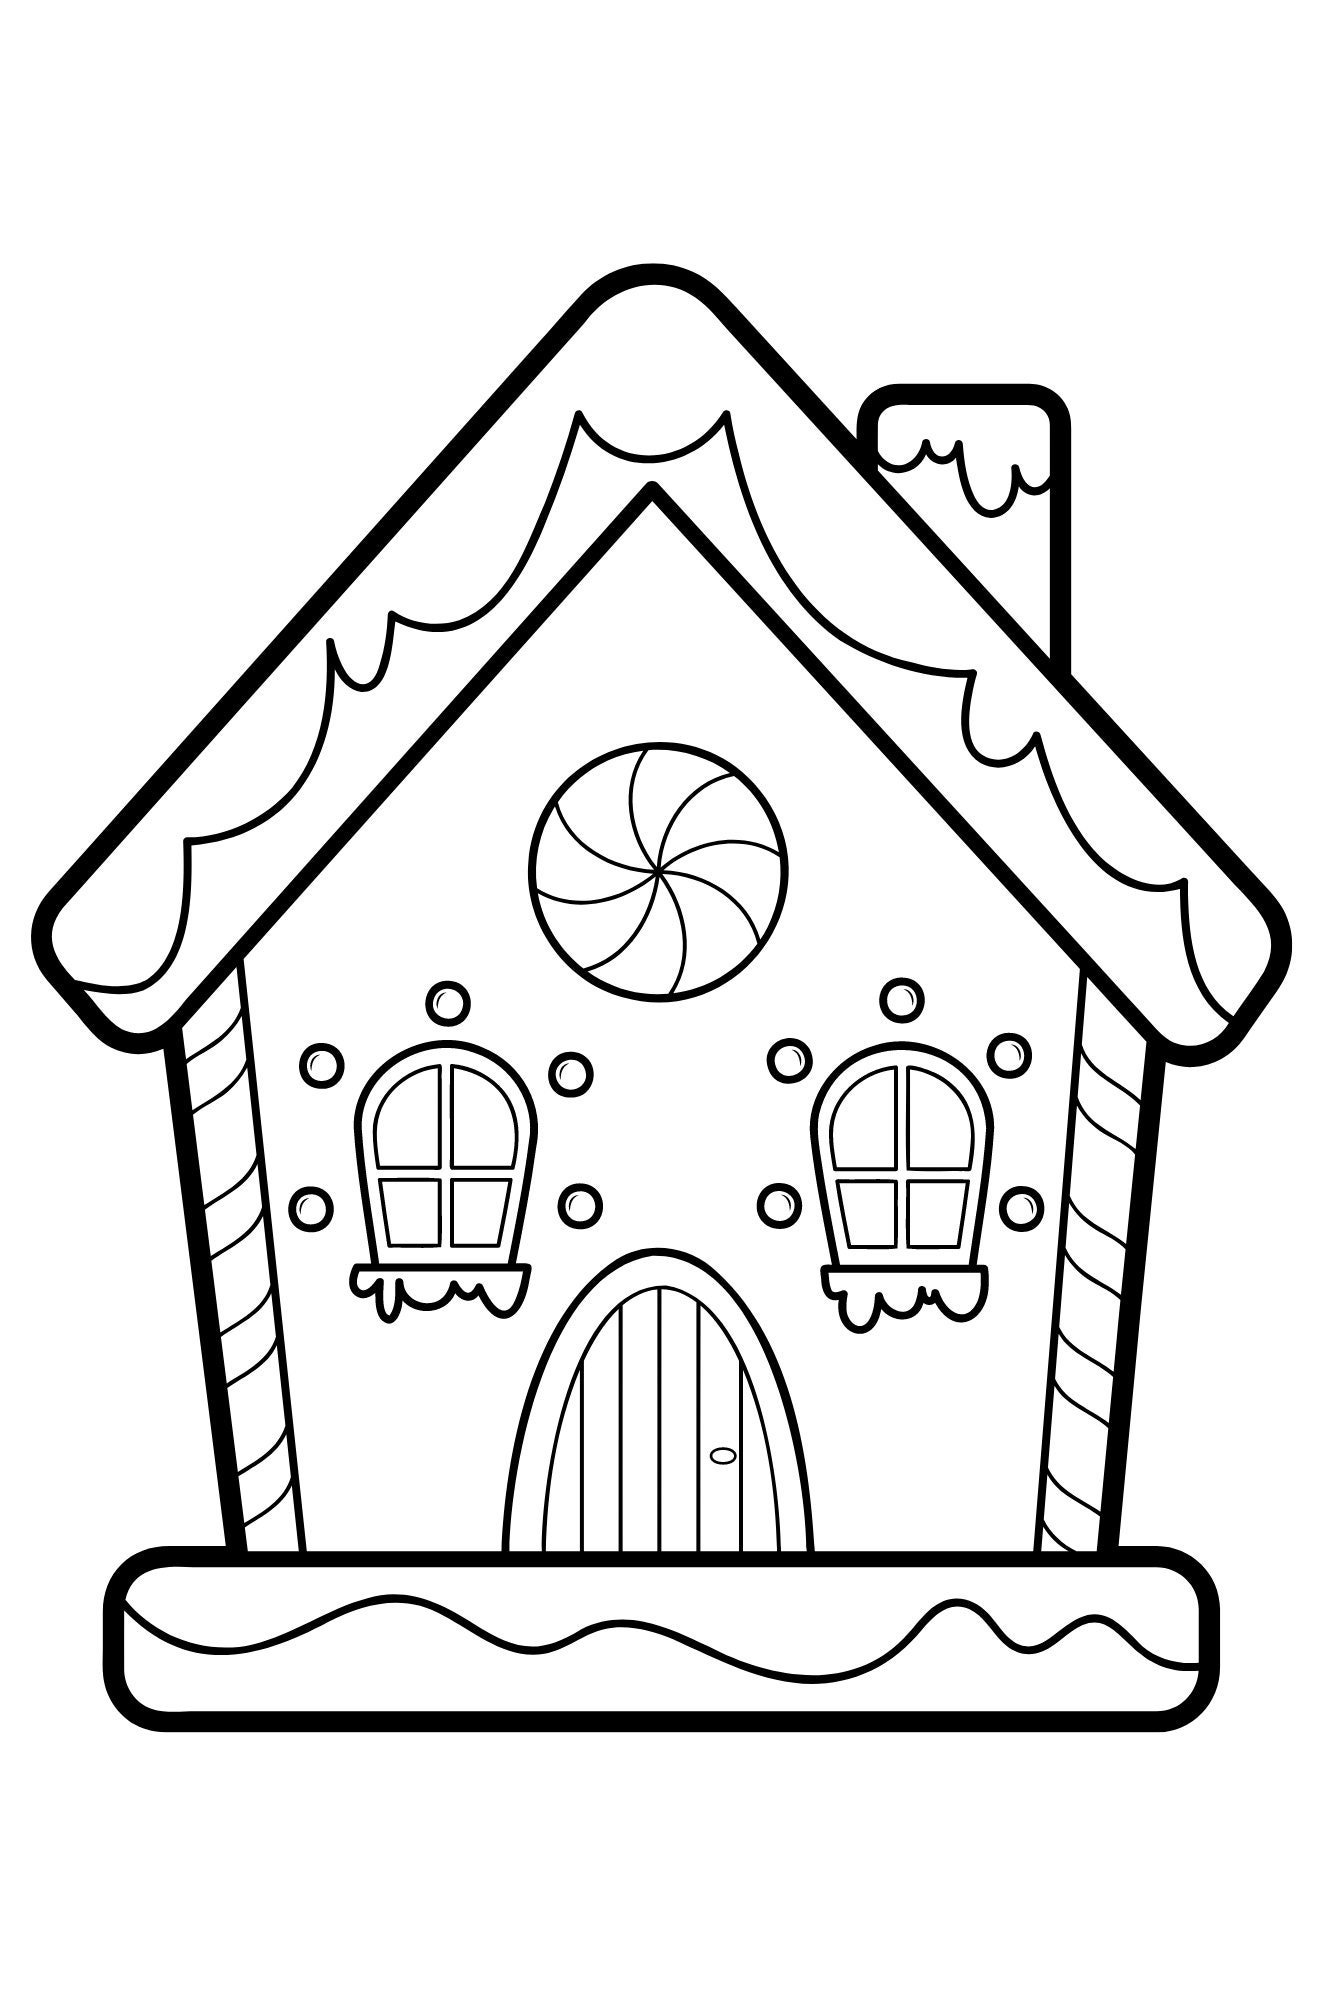 Holiday gingerbread house coloring page